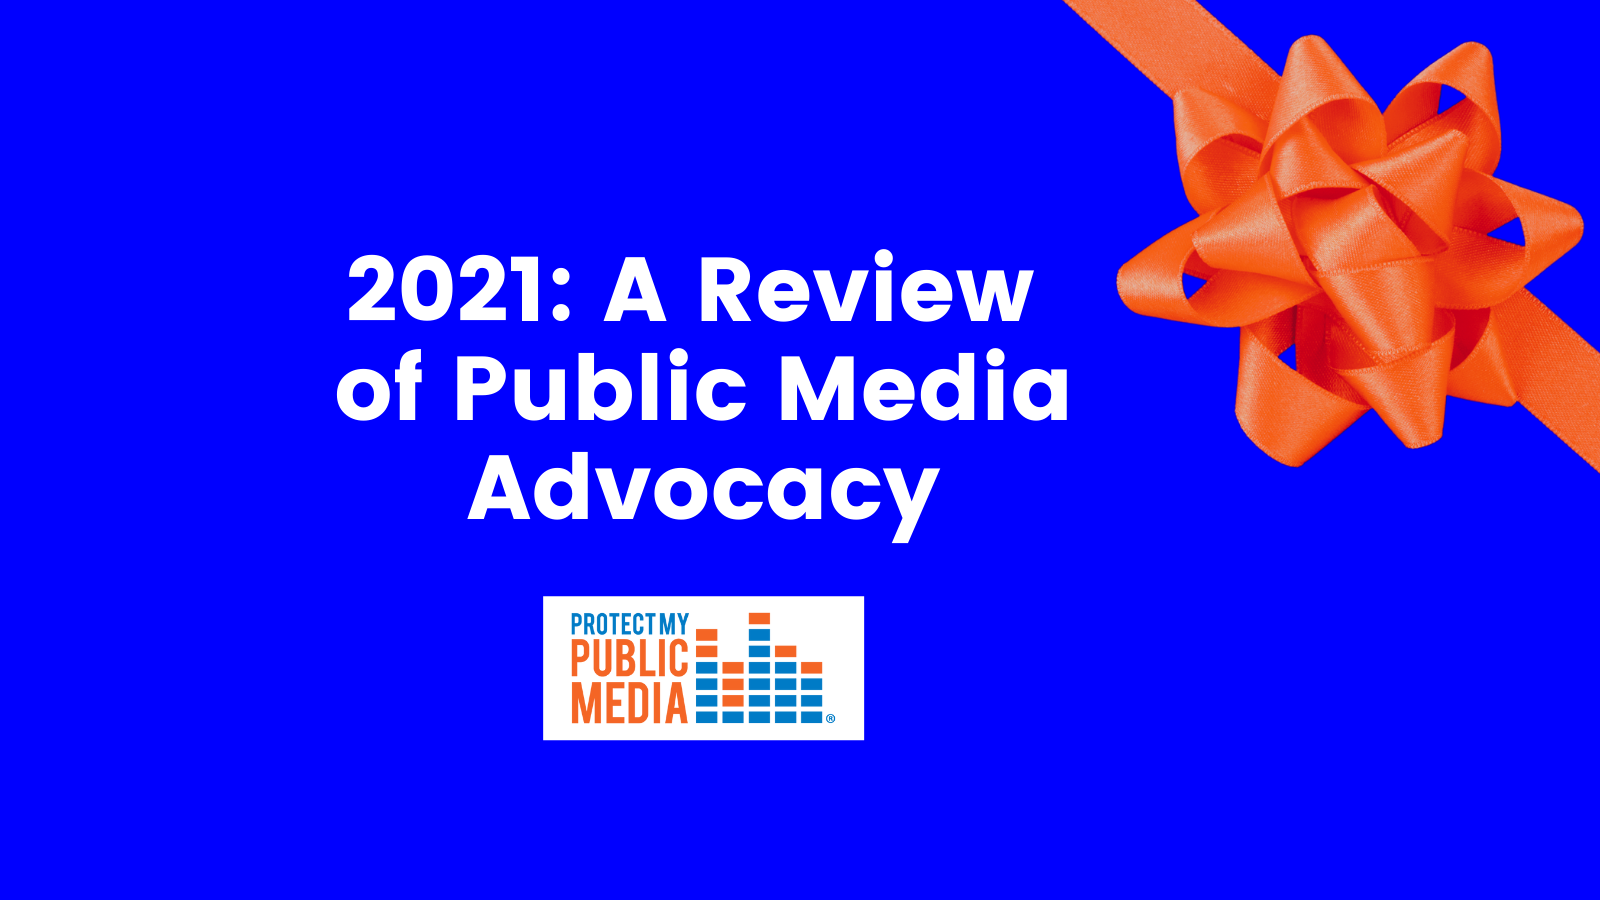 2021: A Review of Public Media Advocacy